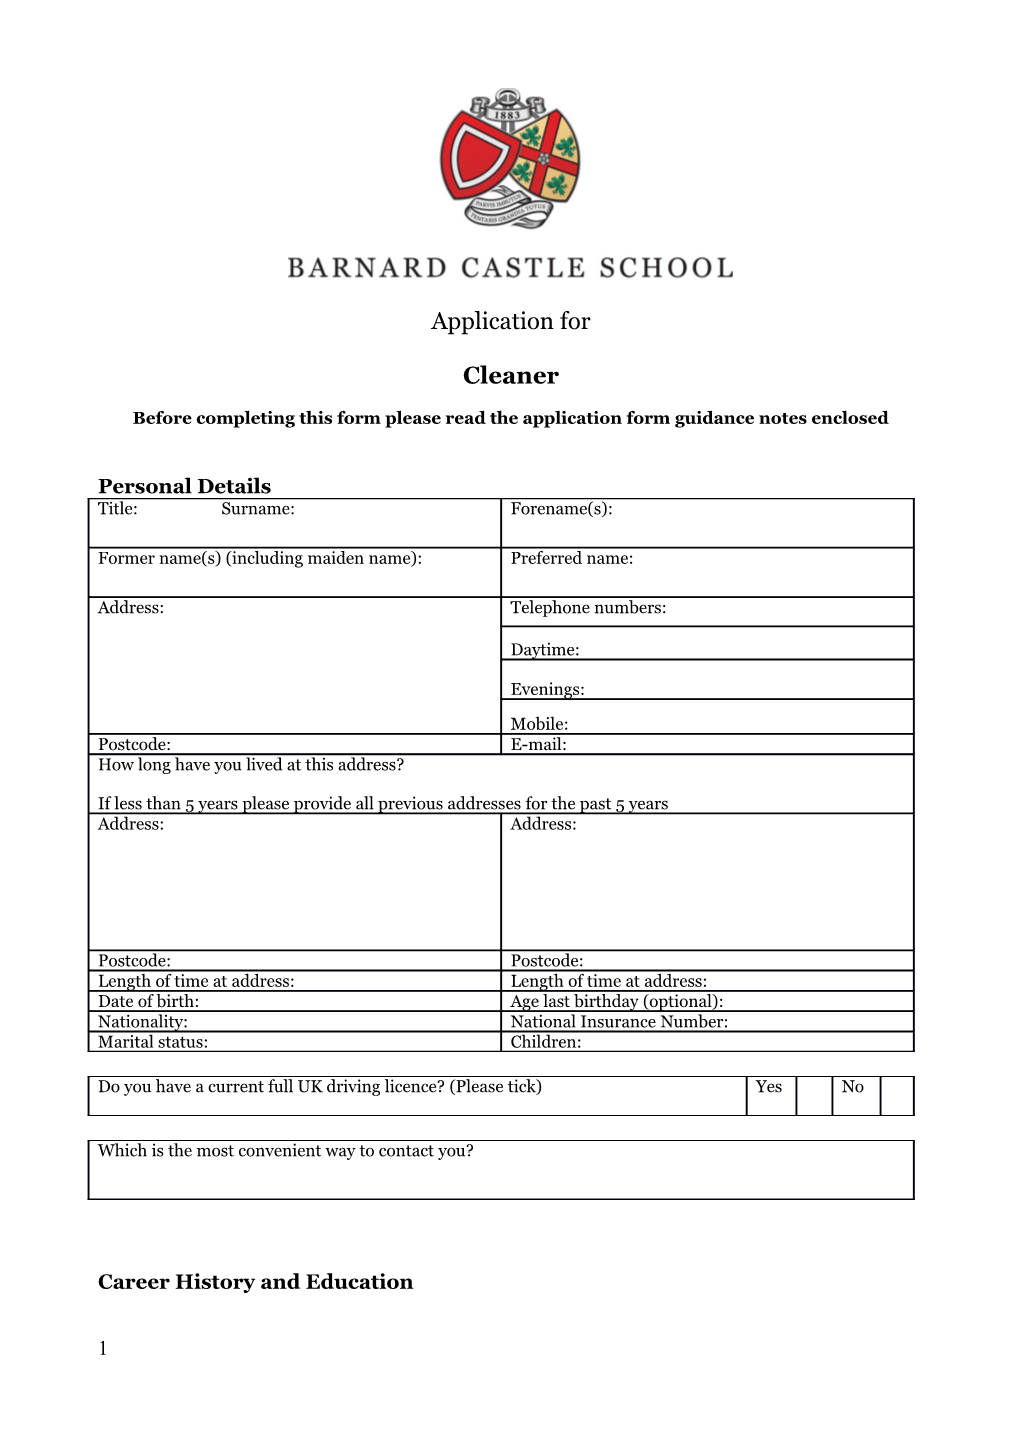 Before Completing This Form Please Read the Application Form Guidance Notes Enclosed